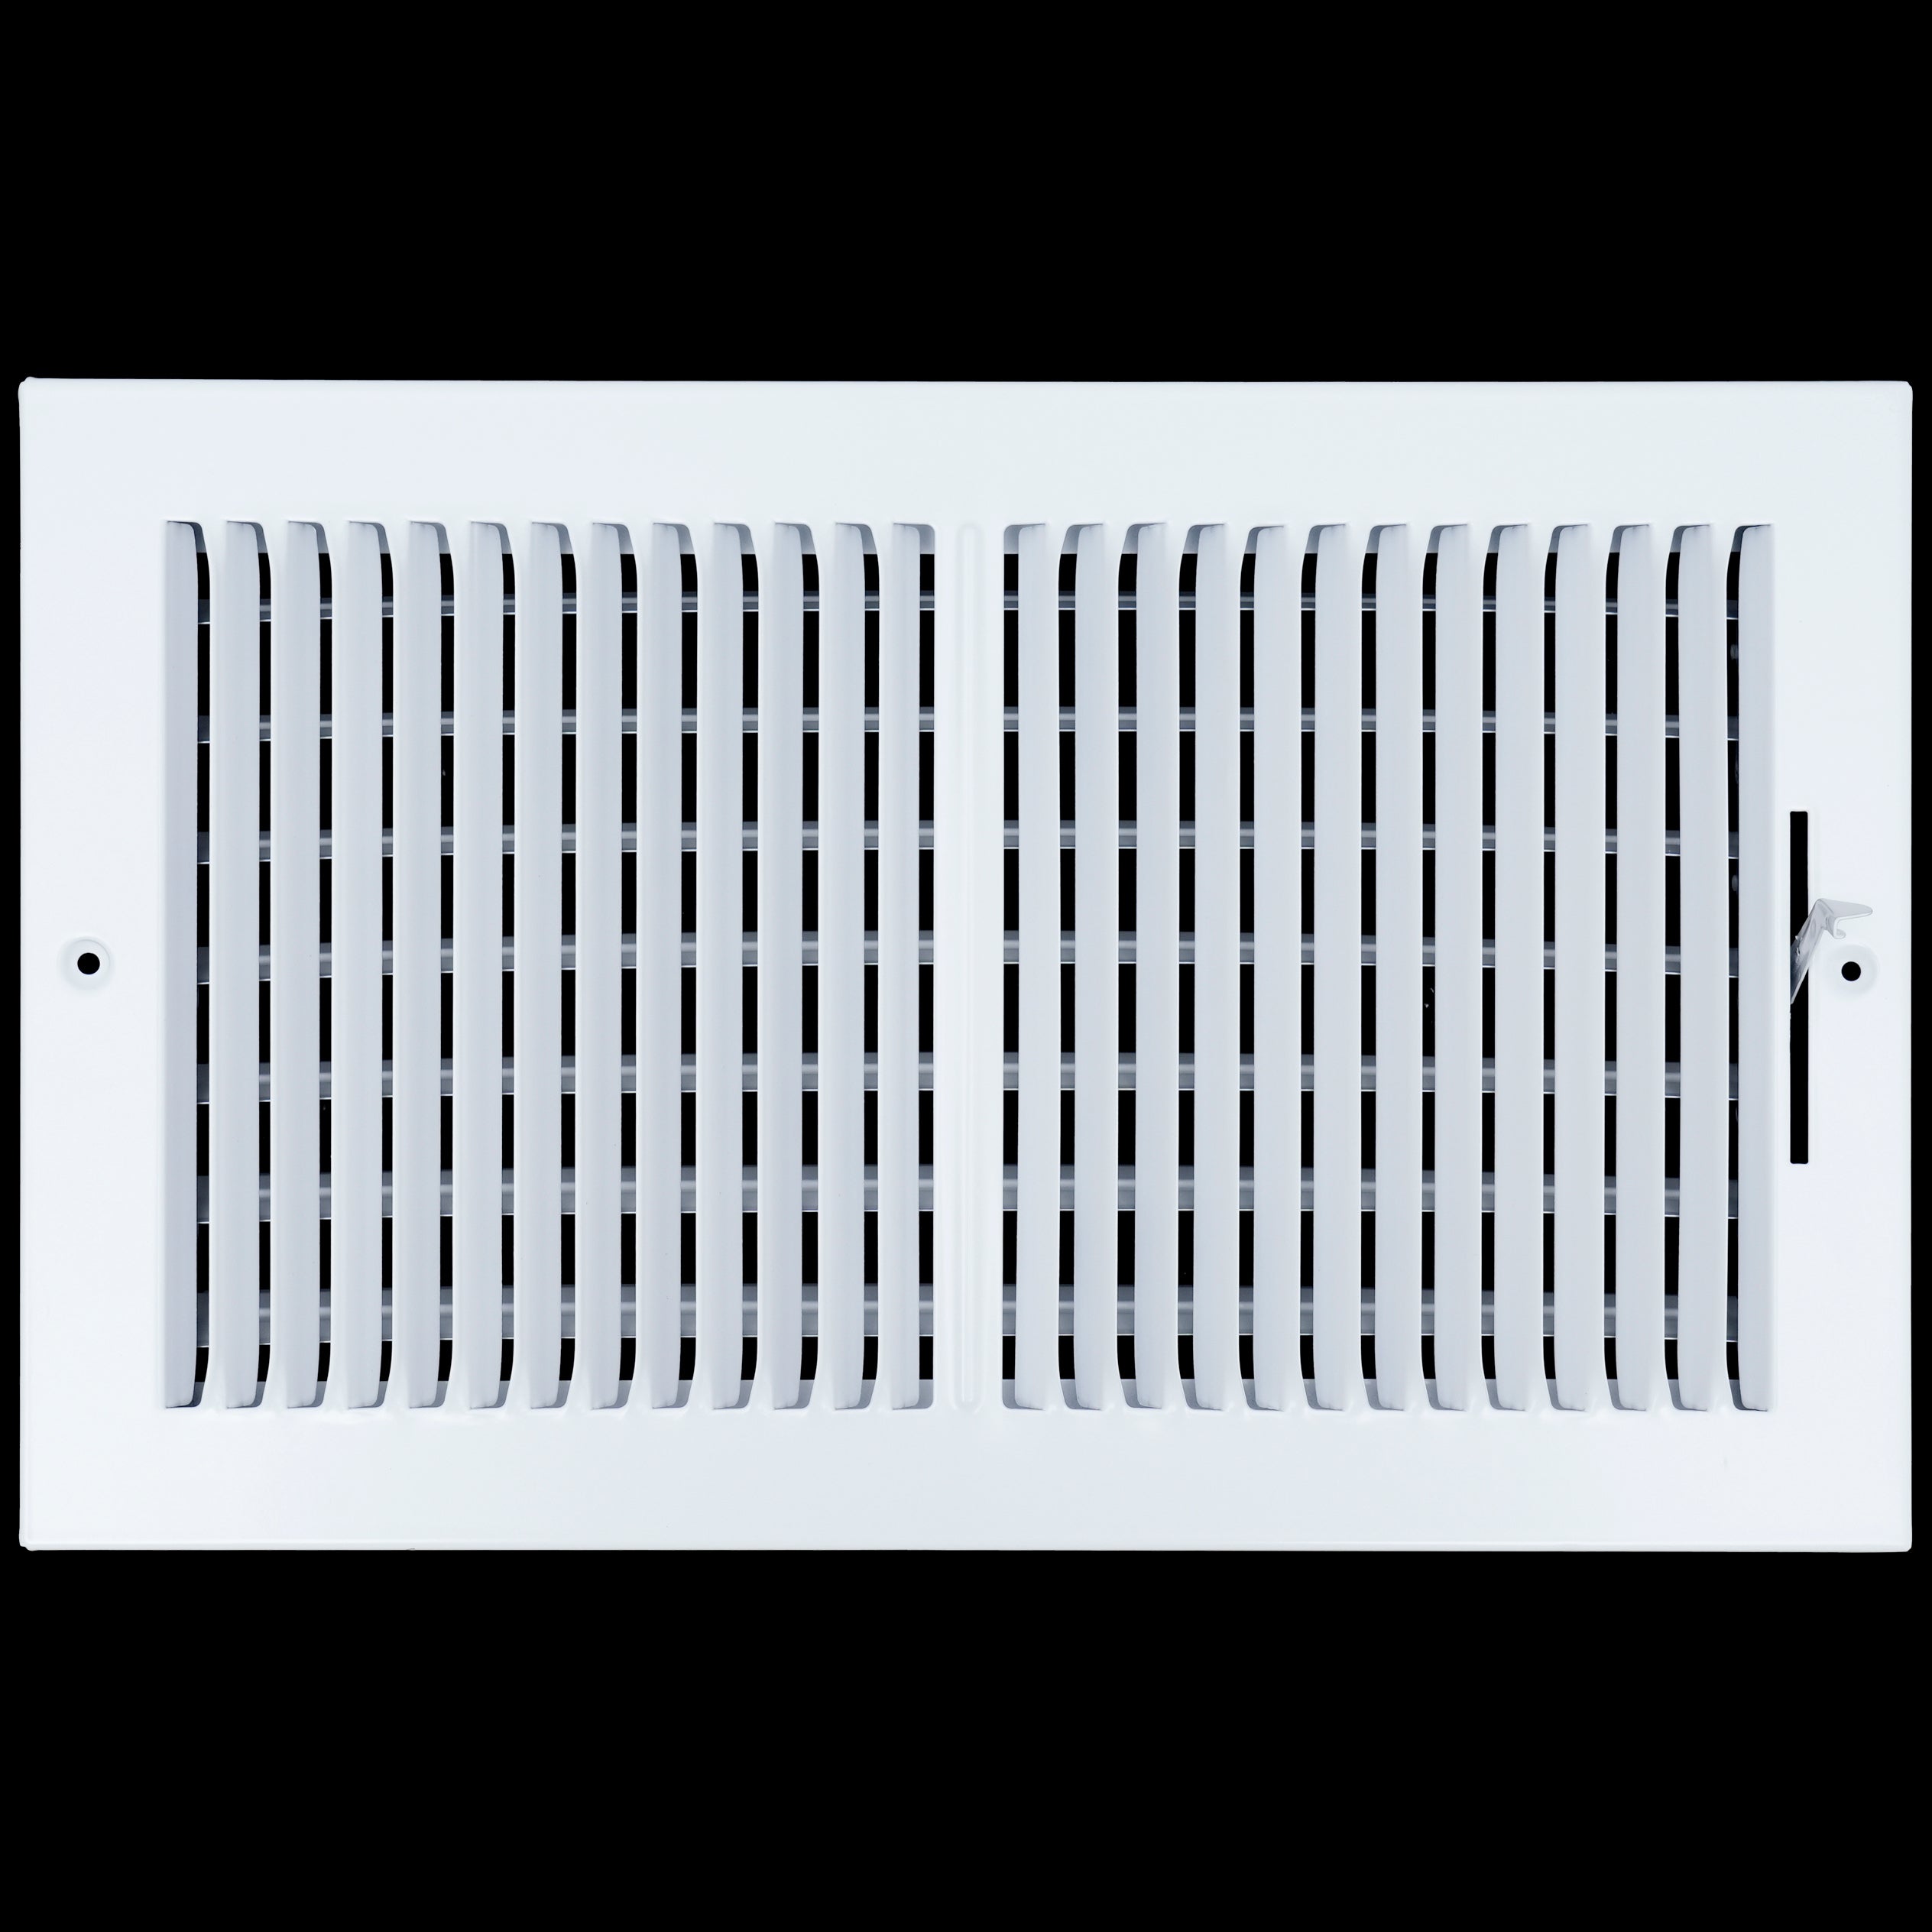 airgrilles 14 x 8 duct opening  -  2 way steel air supply diffuser for sidewall and ceiling hnd-asg-wh-2way-14x8 764613097580 - 1